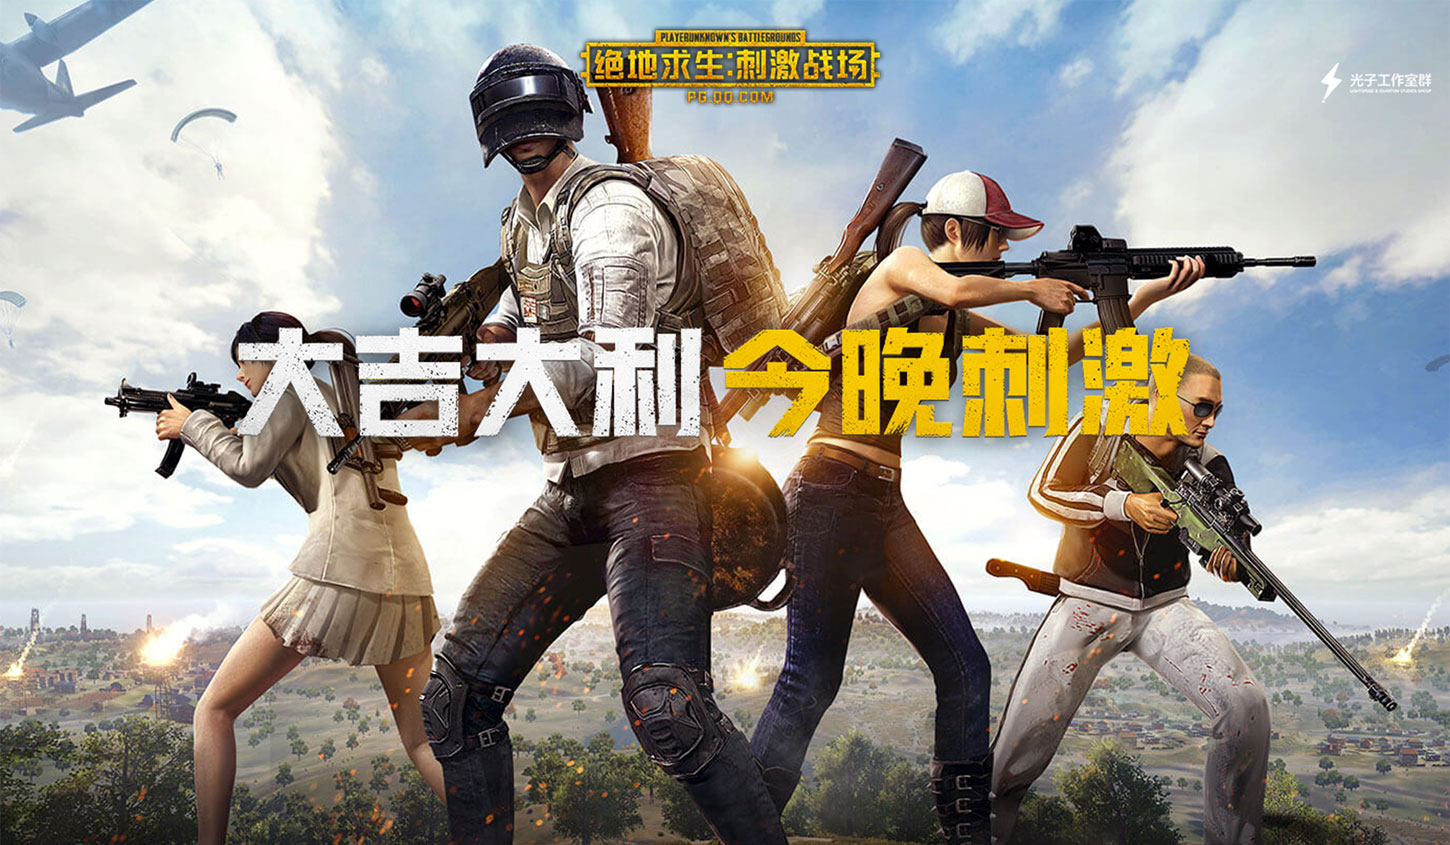 Chinese Survivor Game Post-New Year Trends